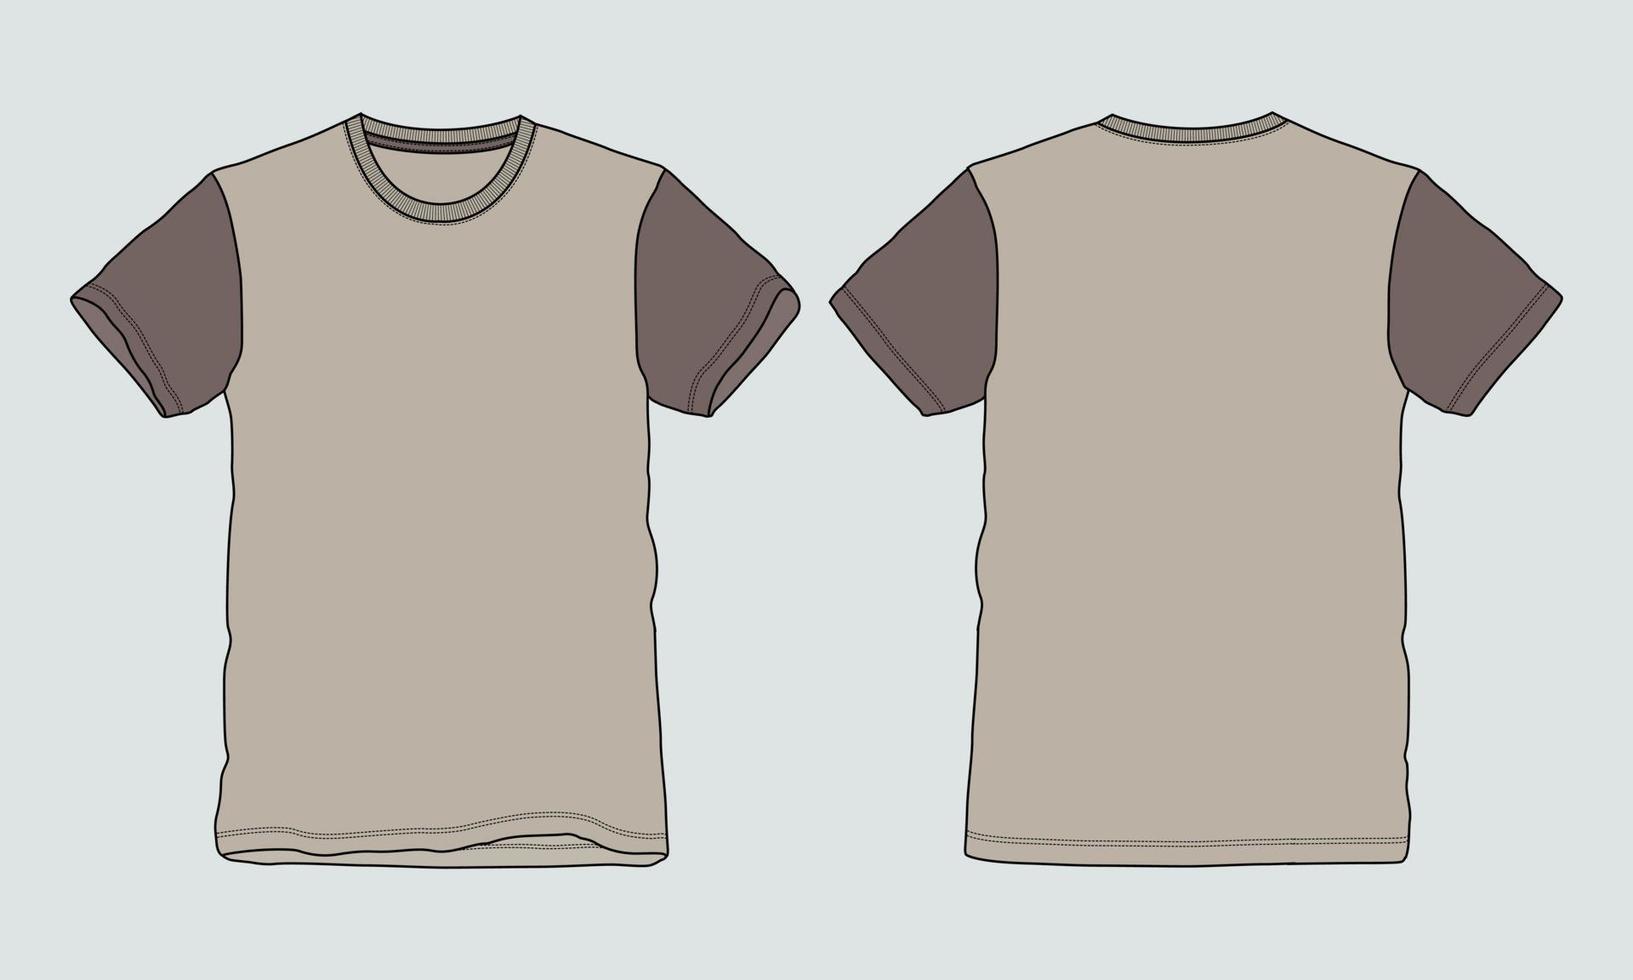 T shirt technical fashion flat sketch vector illustration template Front and back views.